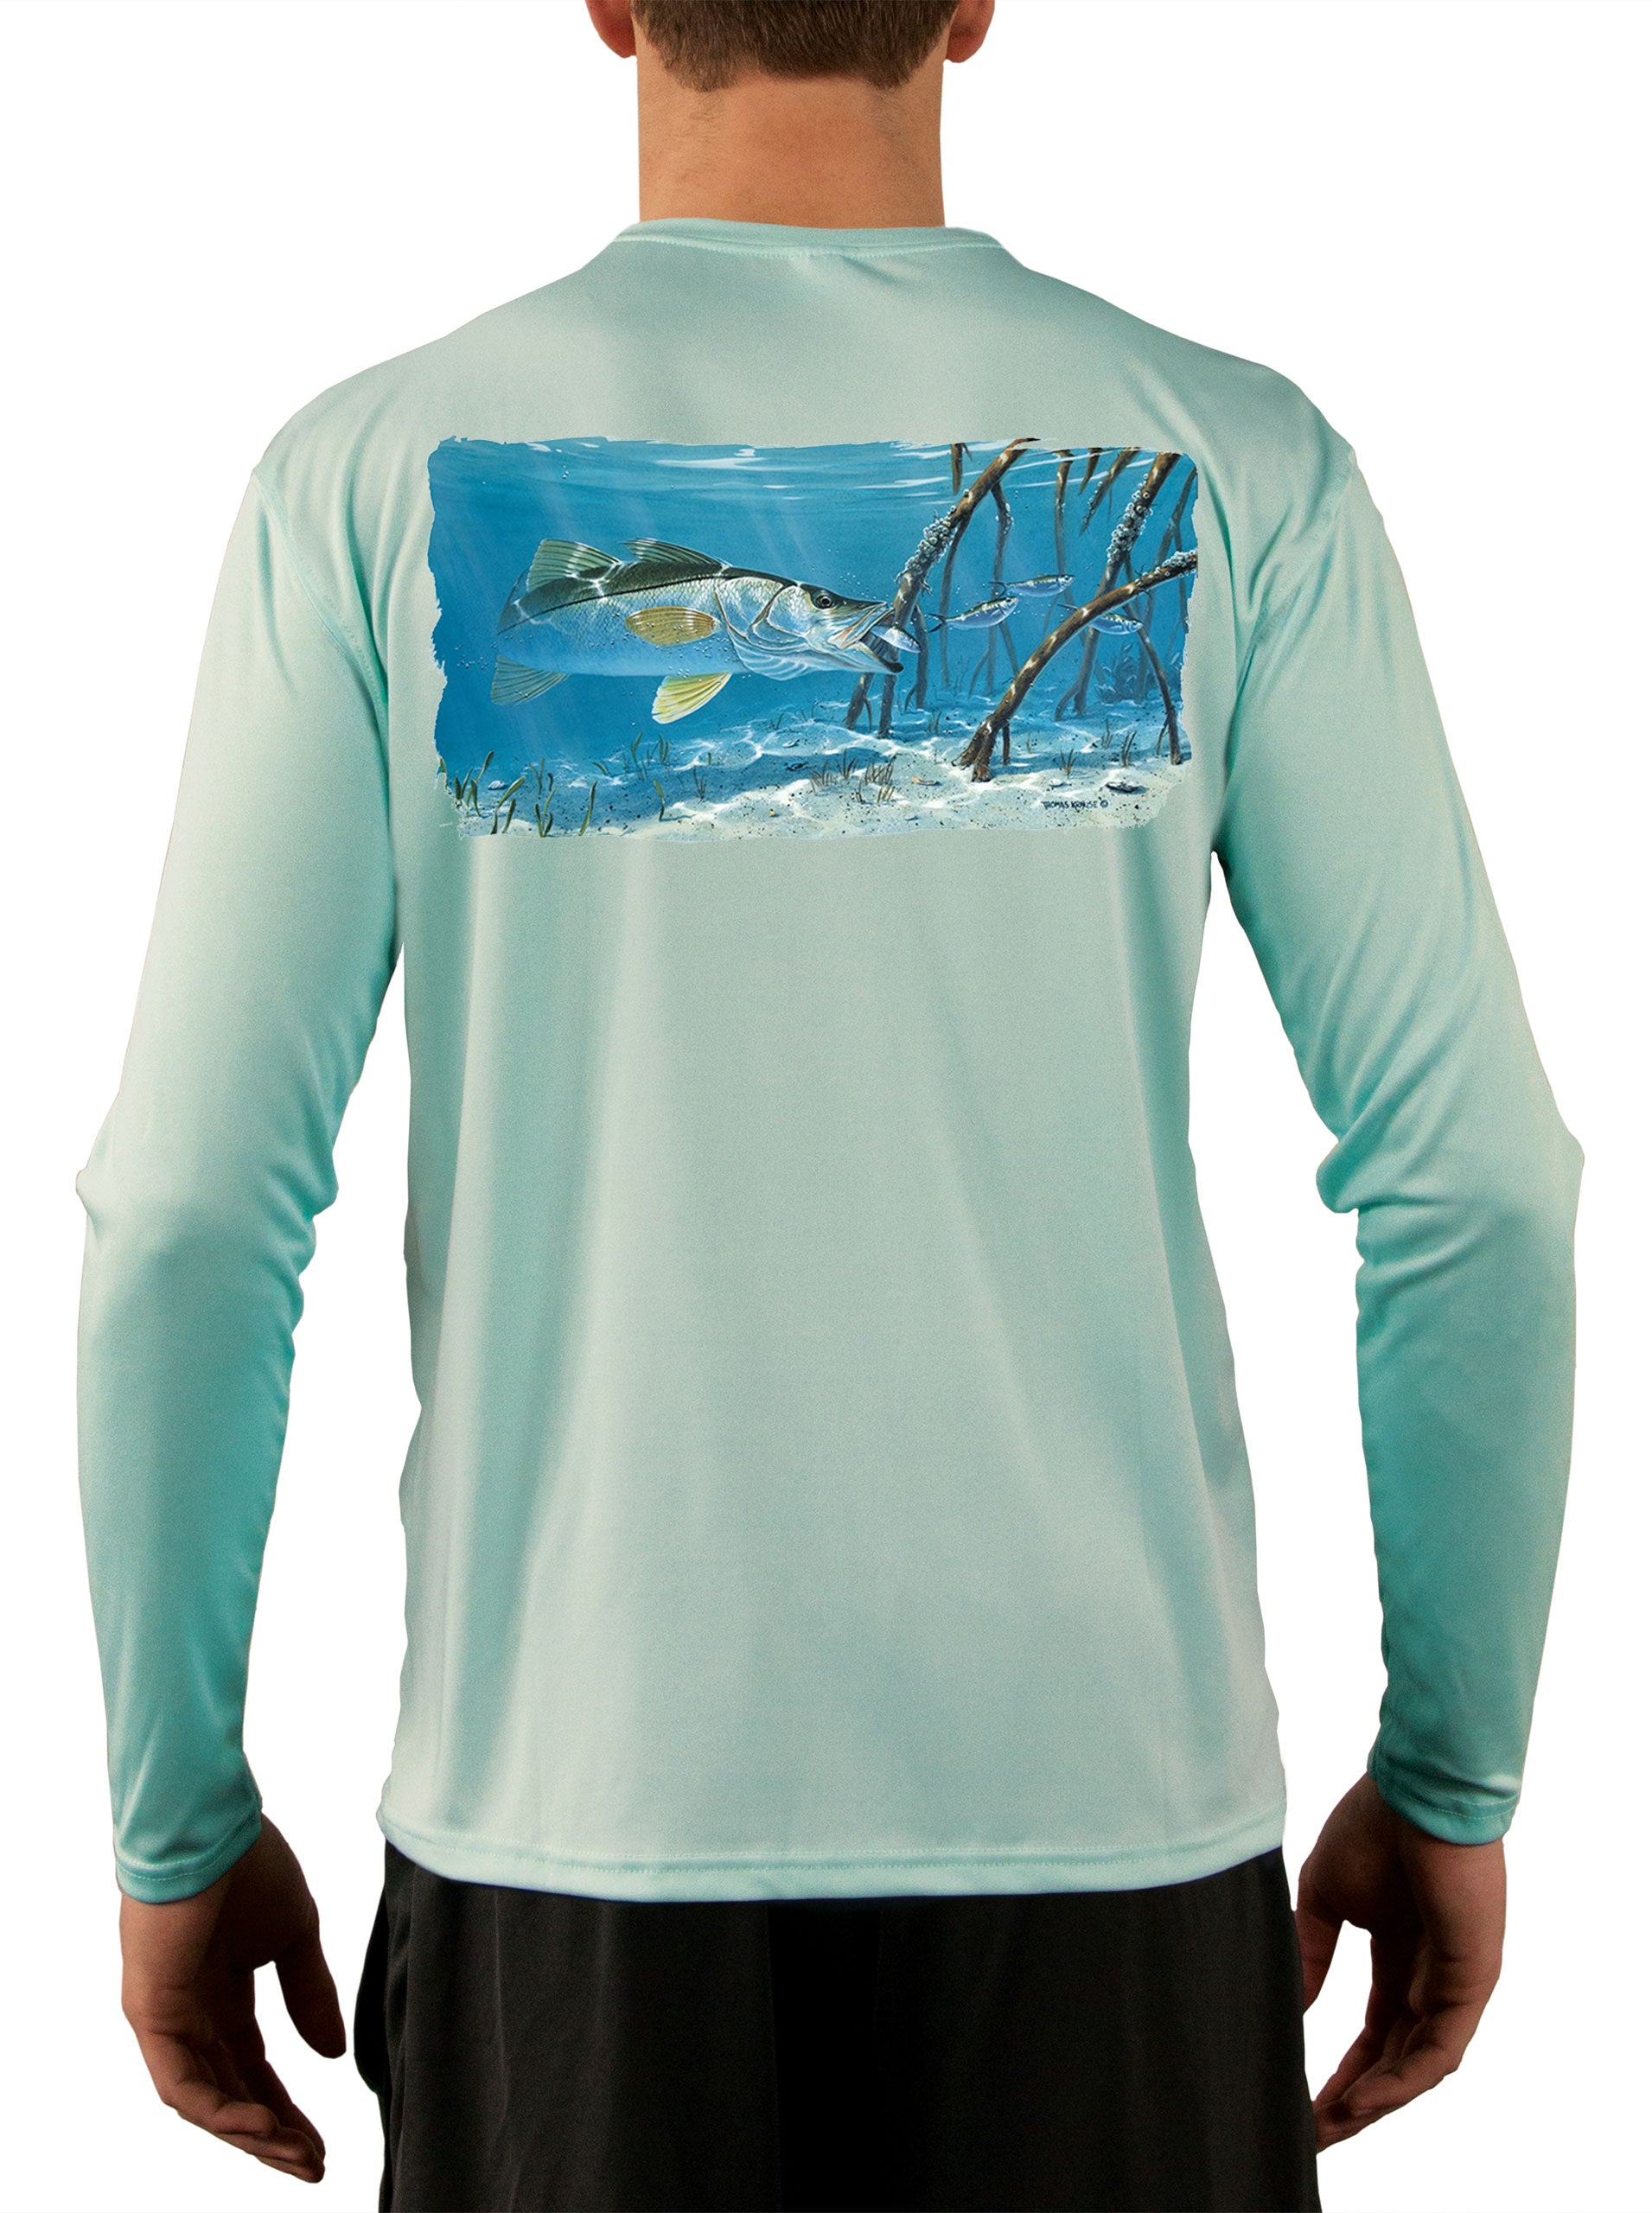 Mangrove Snook Fishing Shirts for Men with Optional Sleeve: Florida Flag or  Snook Scale